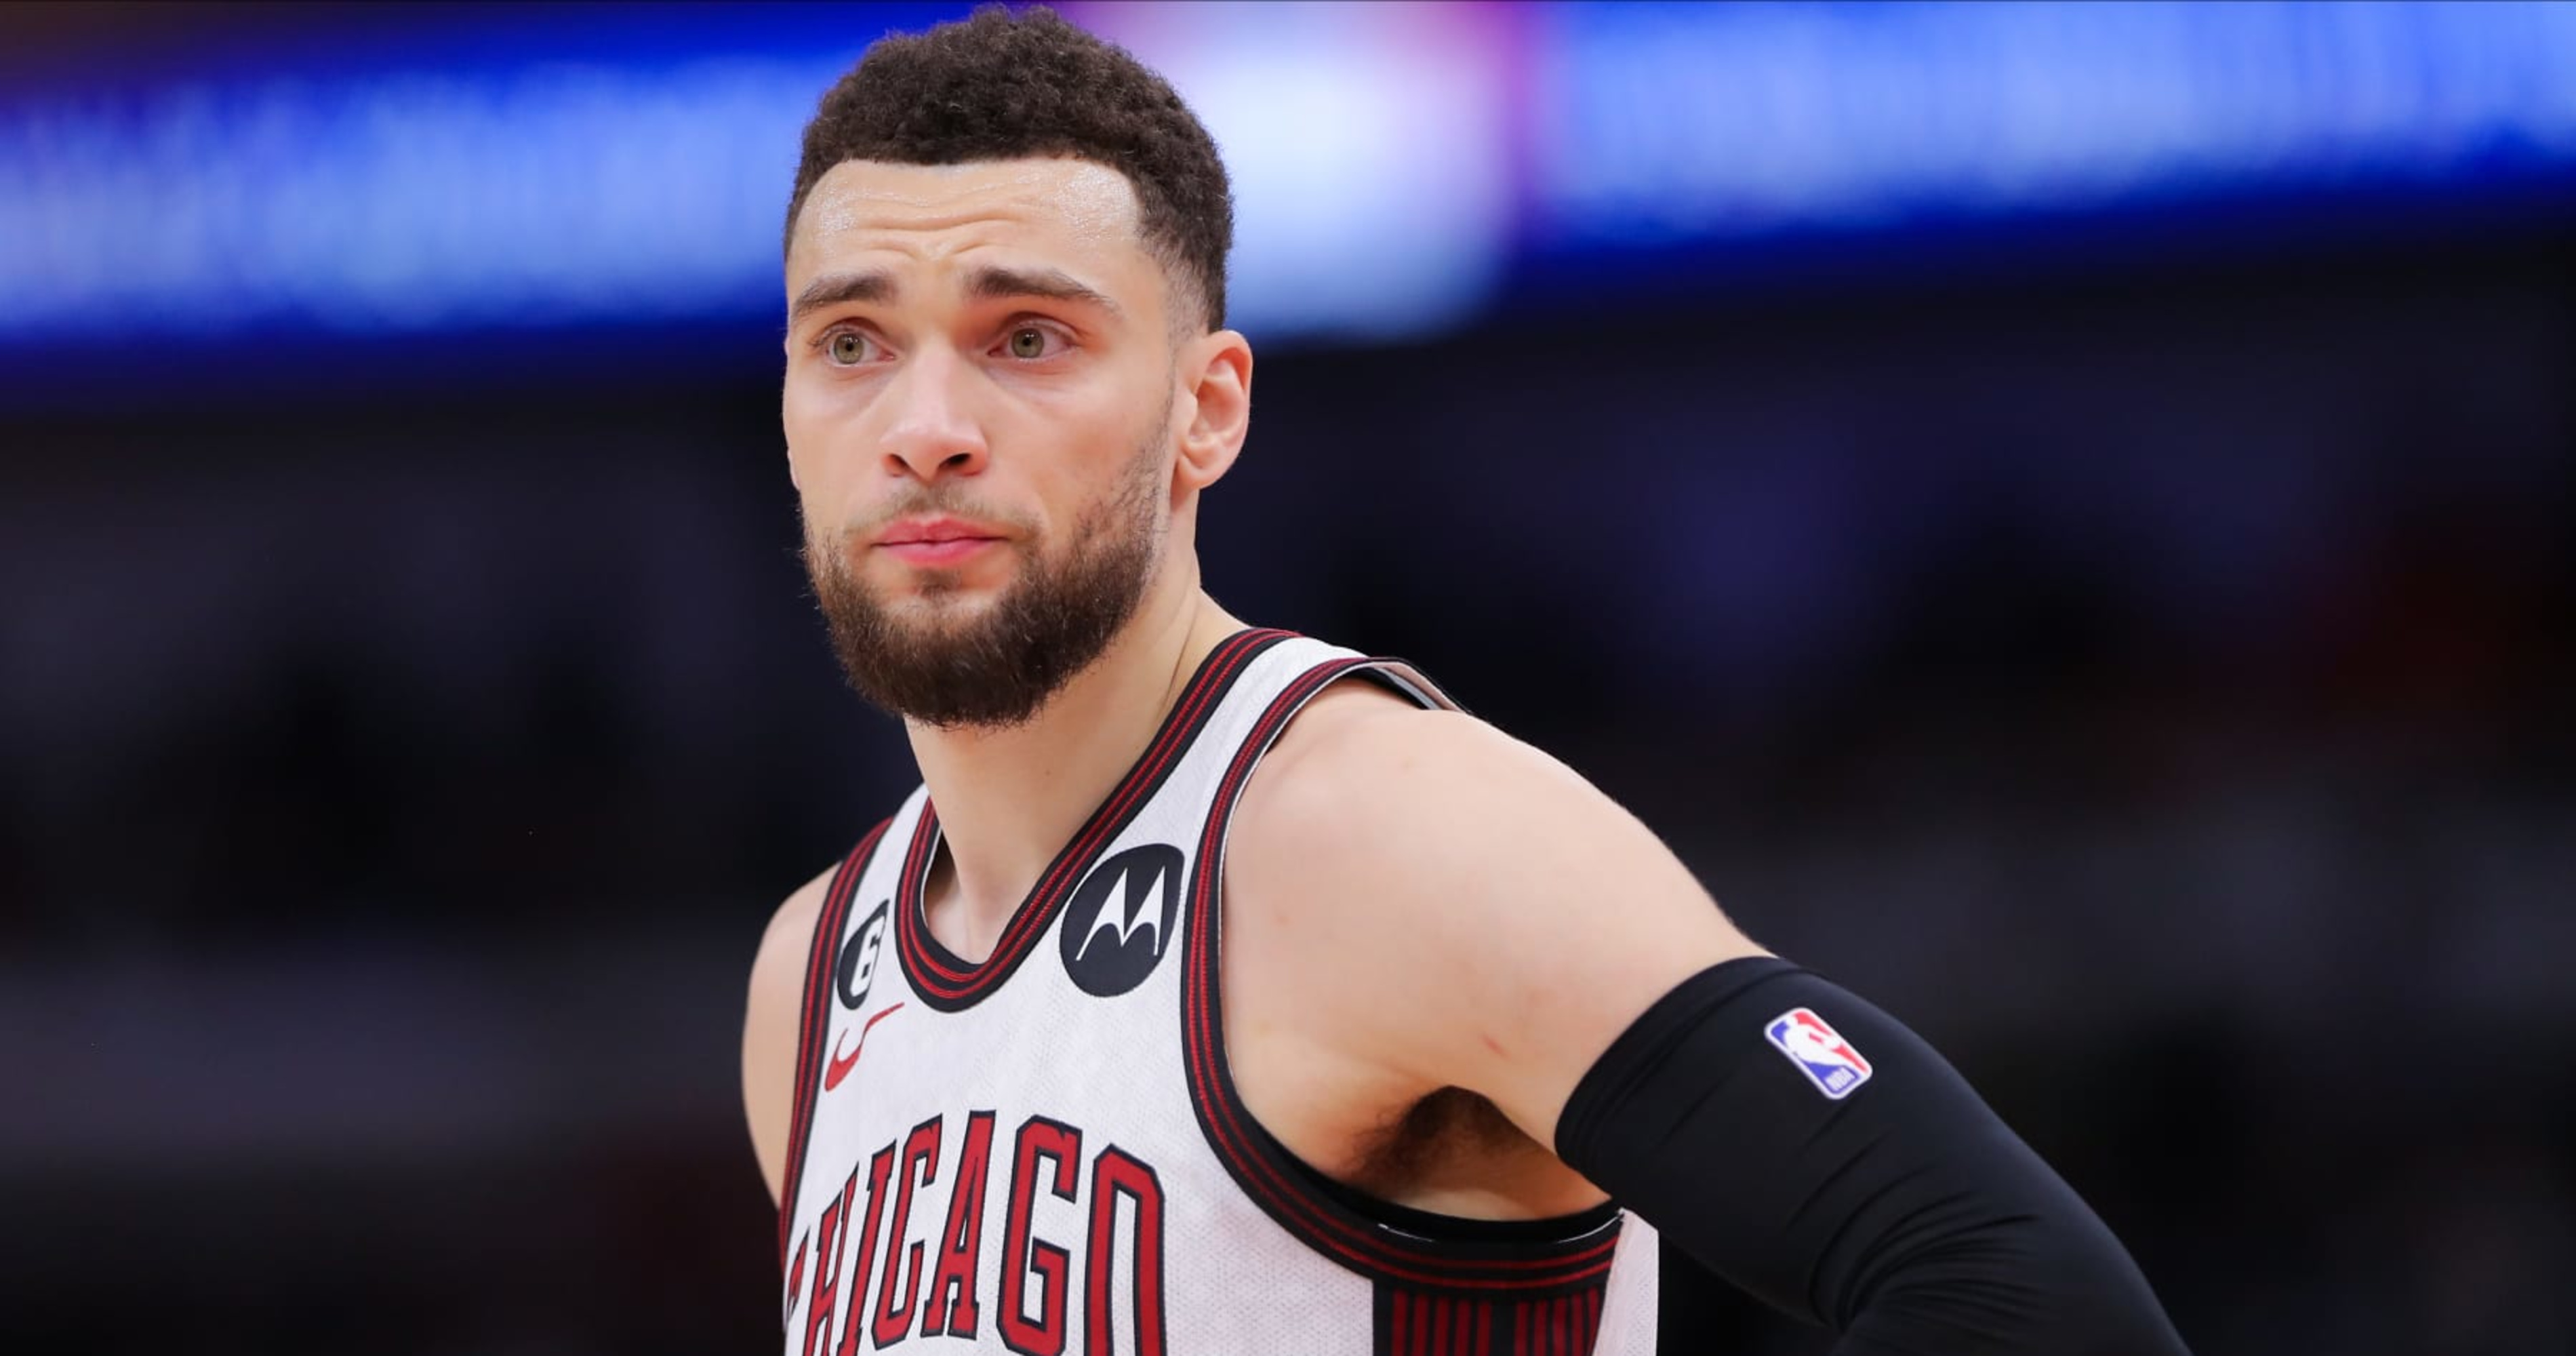 NBA worlds reacts to Zach LaVine's supermax deal